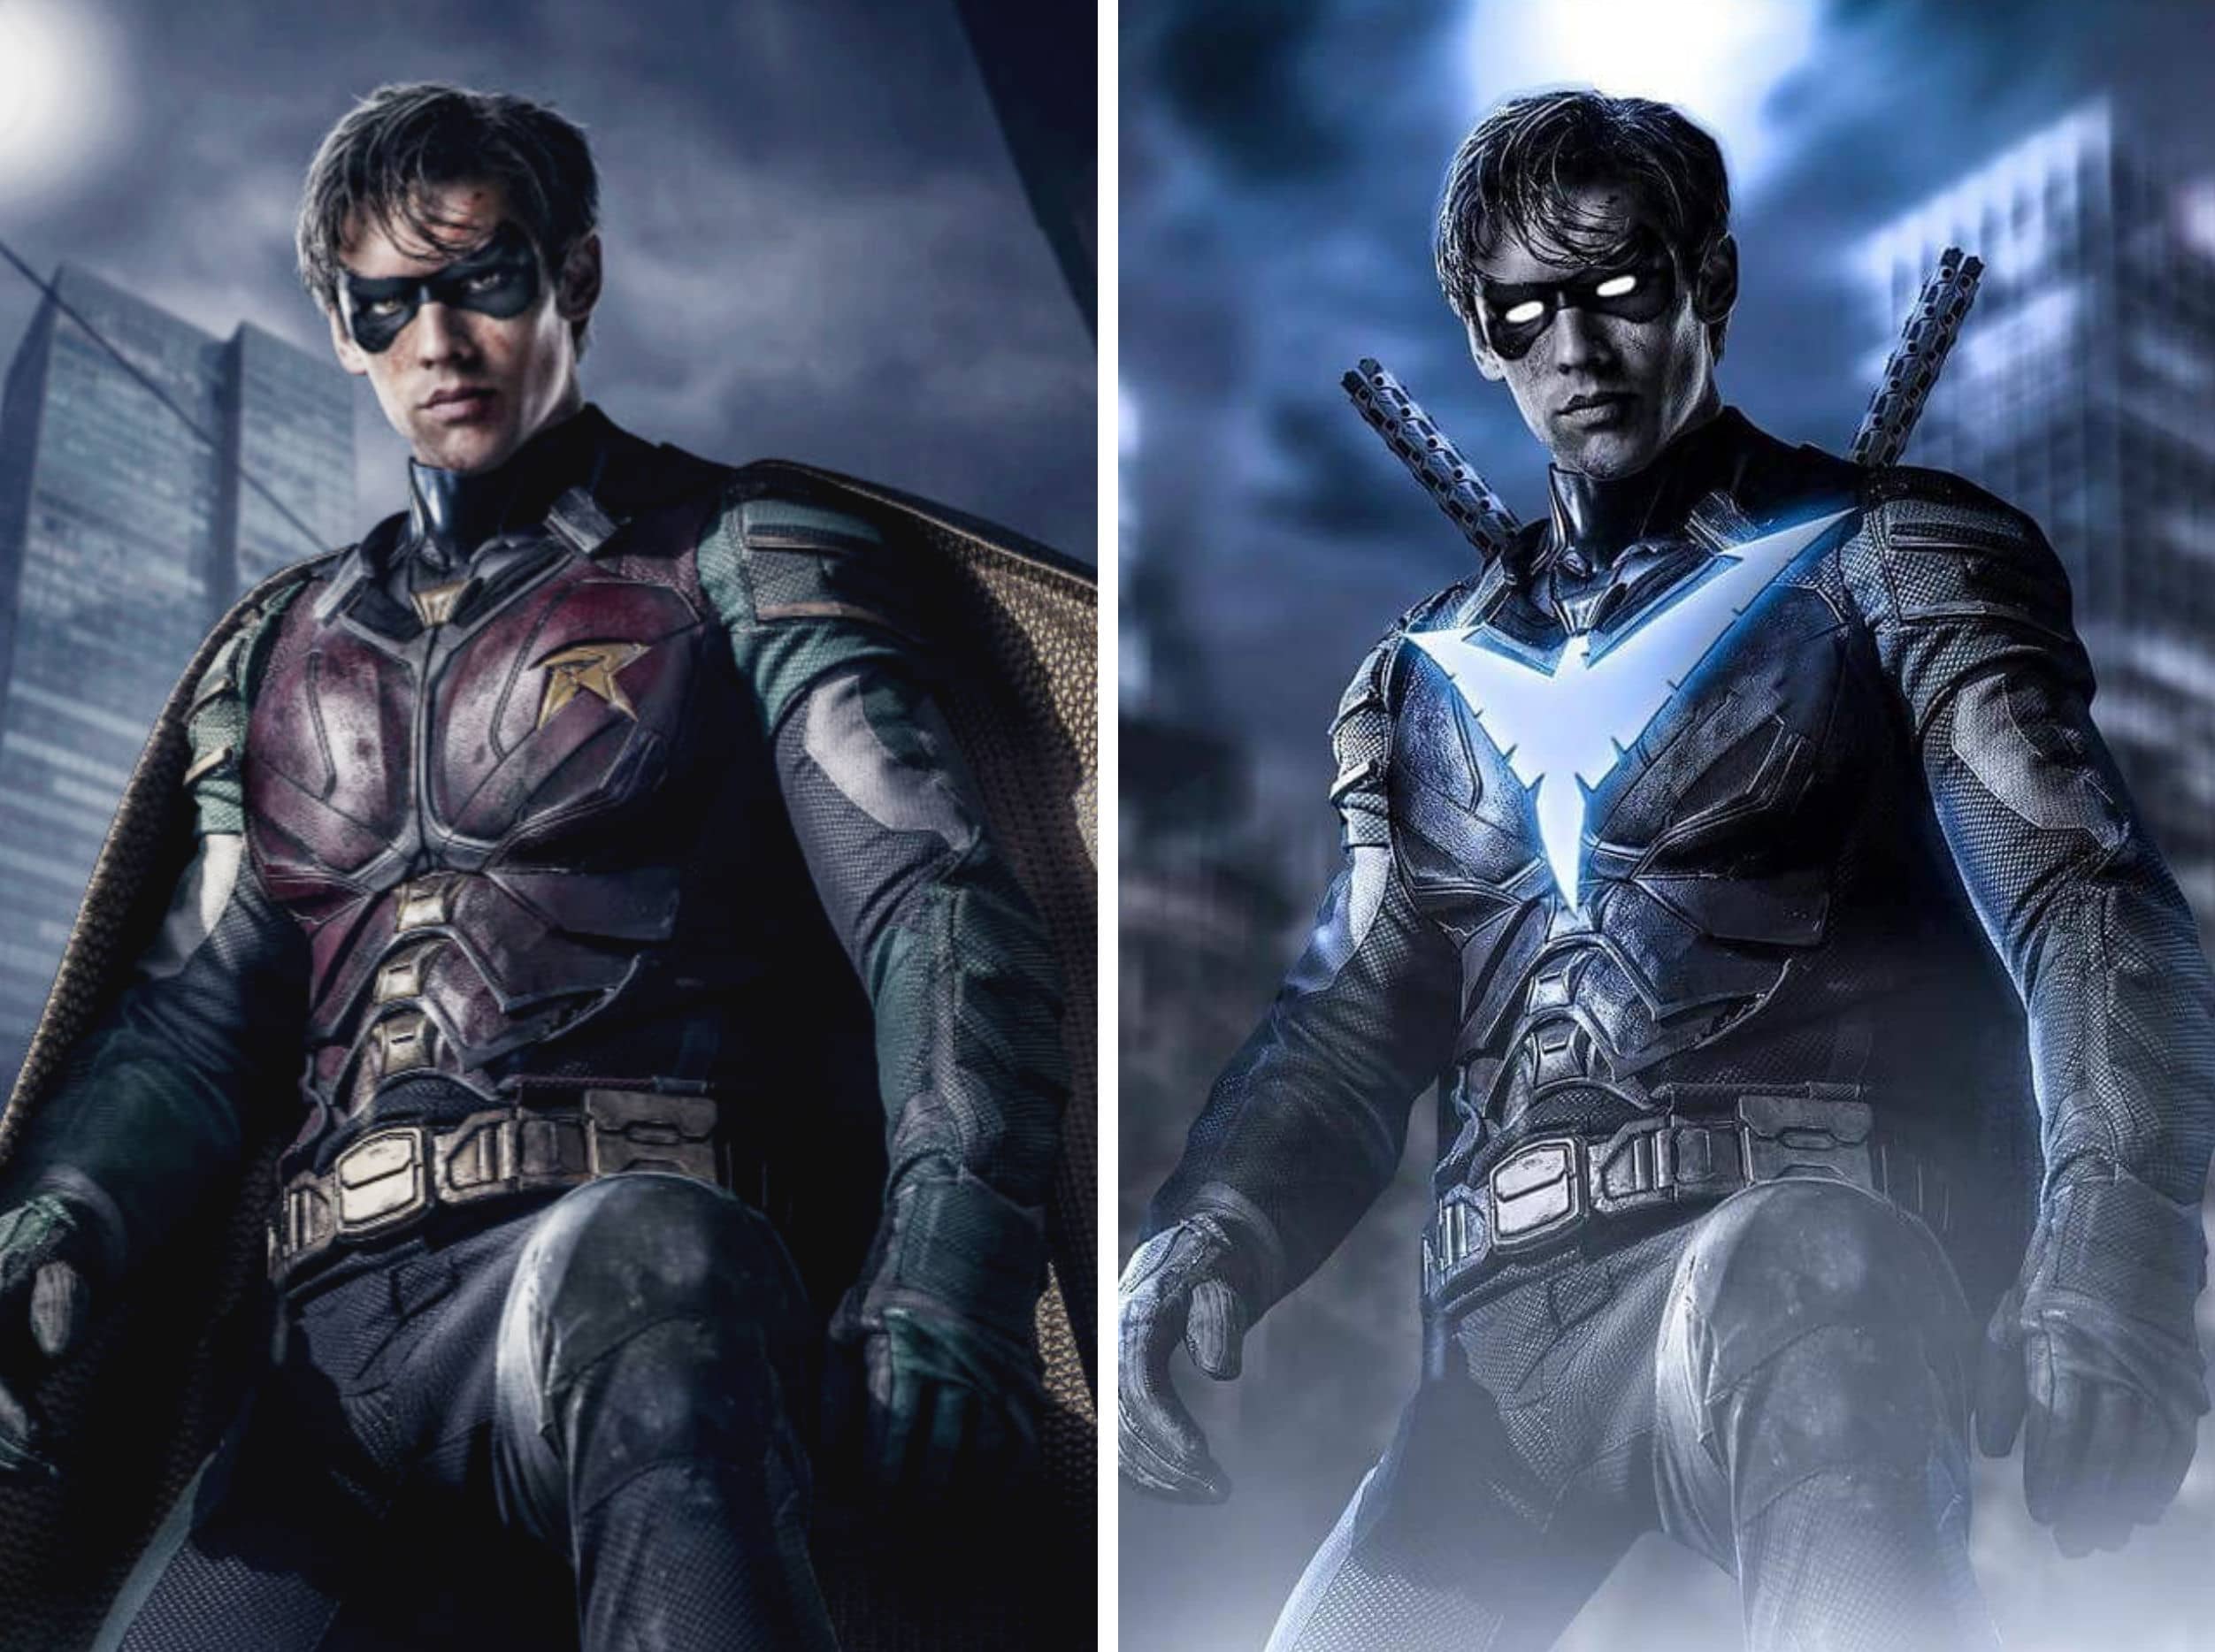 DC Universe's Titans Confirms Nightwing Costume For Season 2